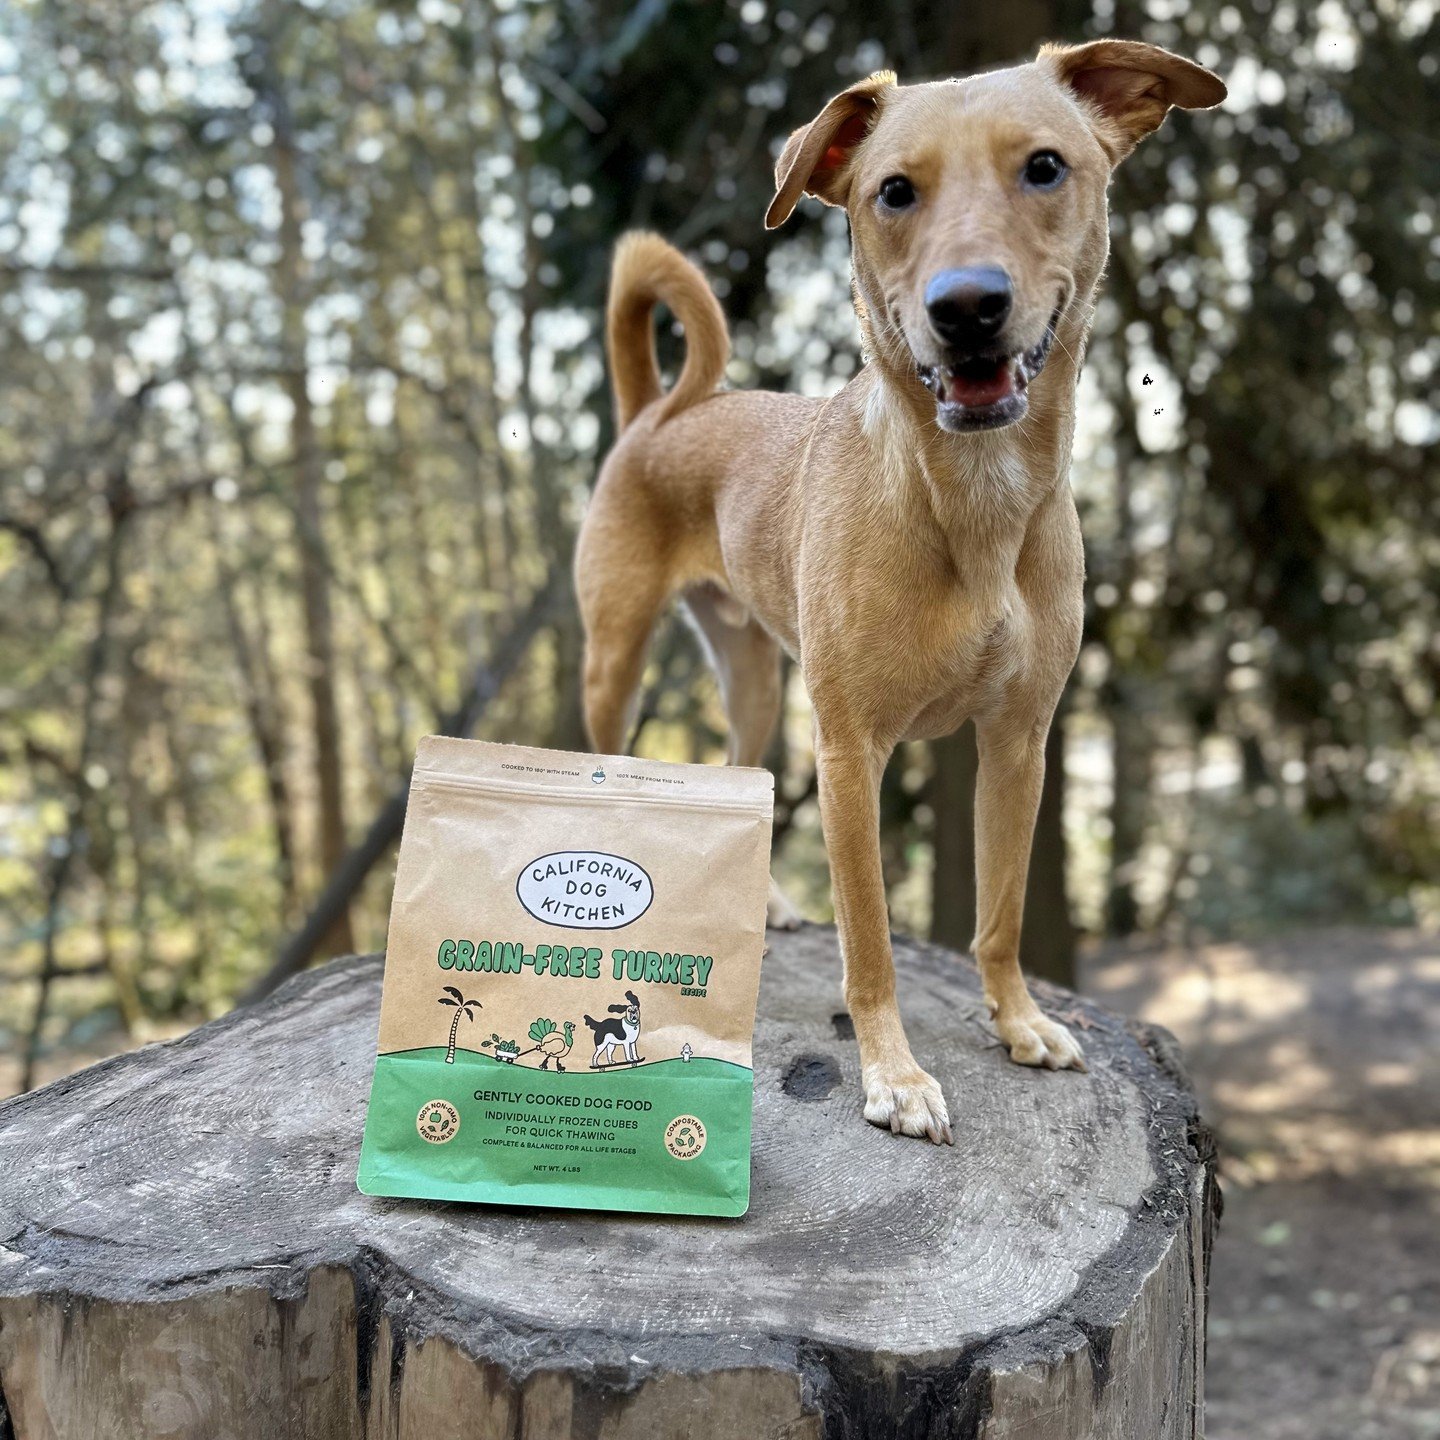 We may be California Dog Kitchen, but you can find us at over 50 retailers in the PNW, and starting this week, select stores in the Bay Area. Check out our handy store locater on our website to find an independent retailer near you. 🌲

This is Ollie